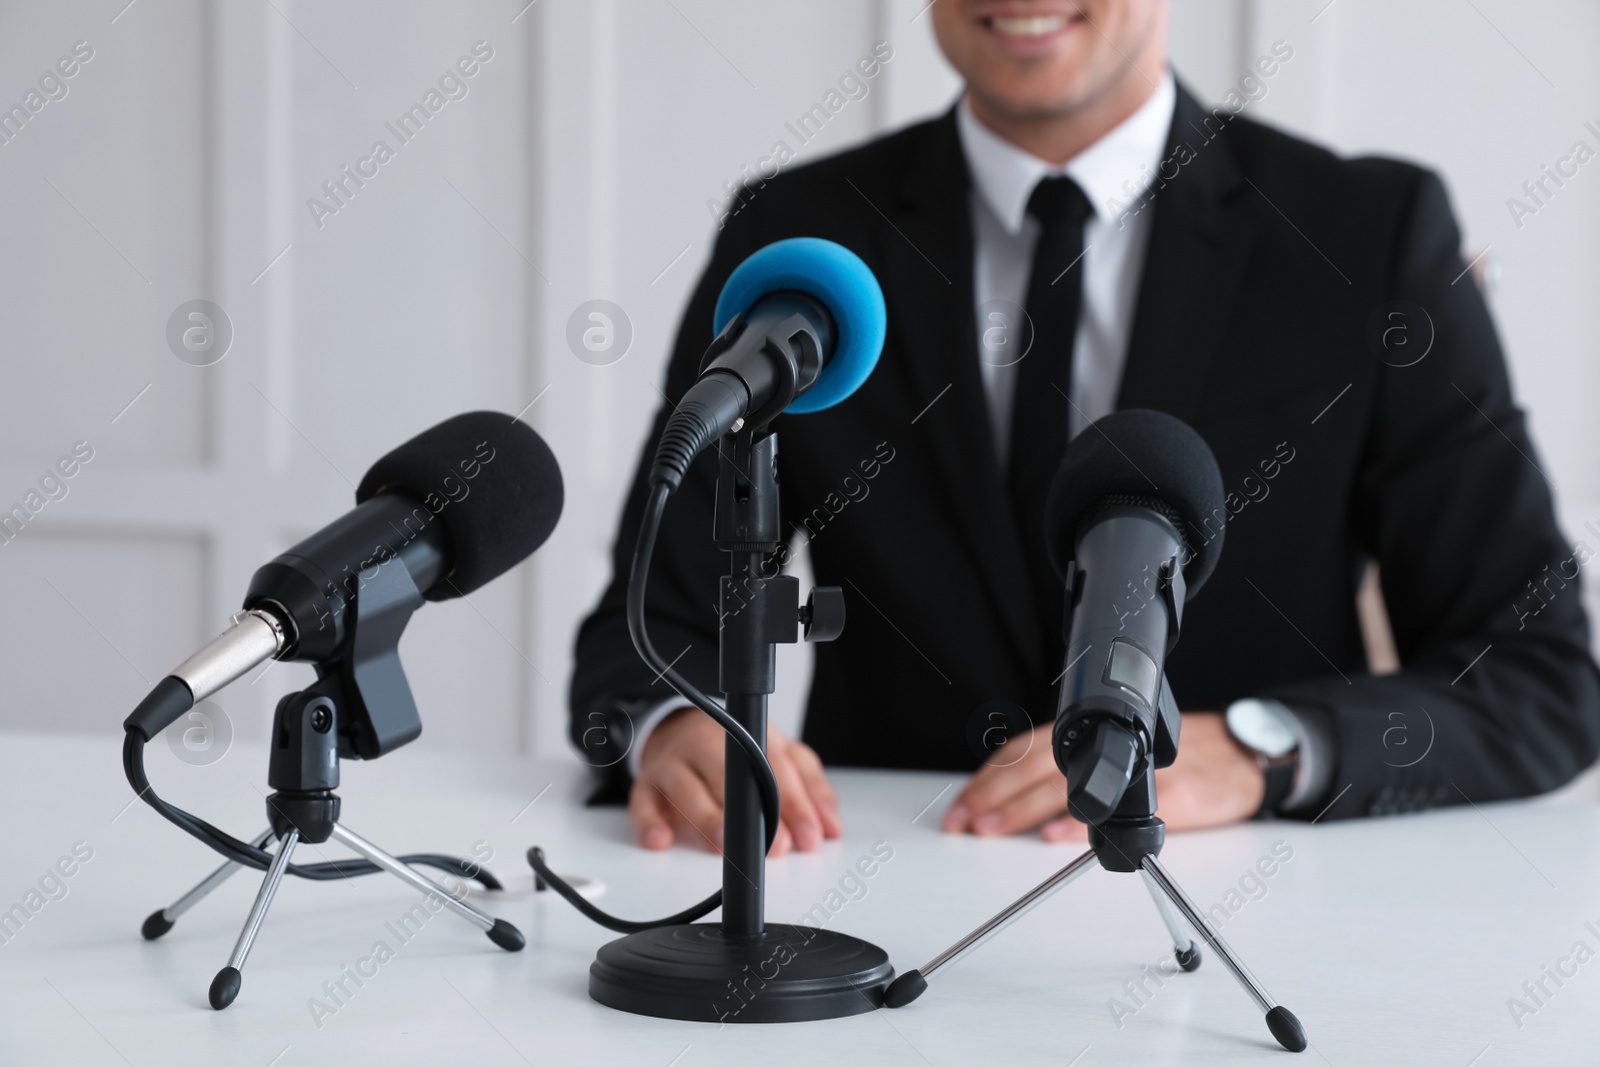 Photo of Business man giving interview at official event, closeup